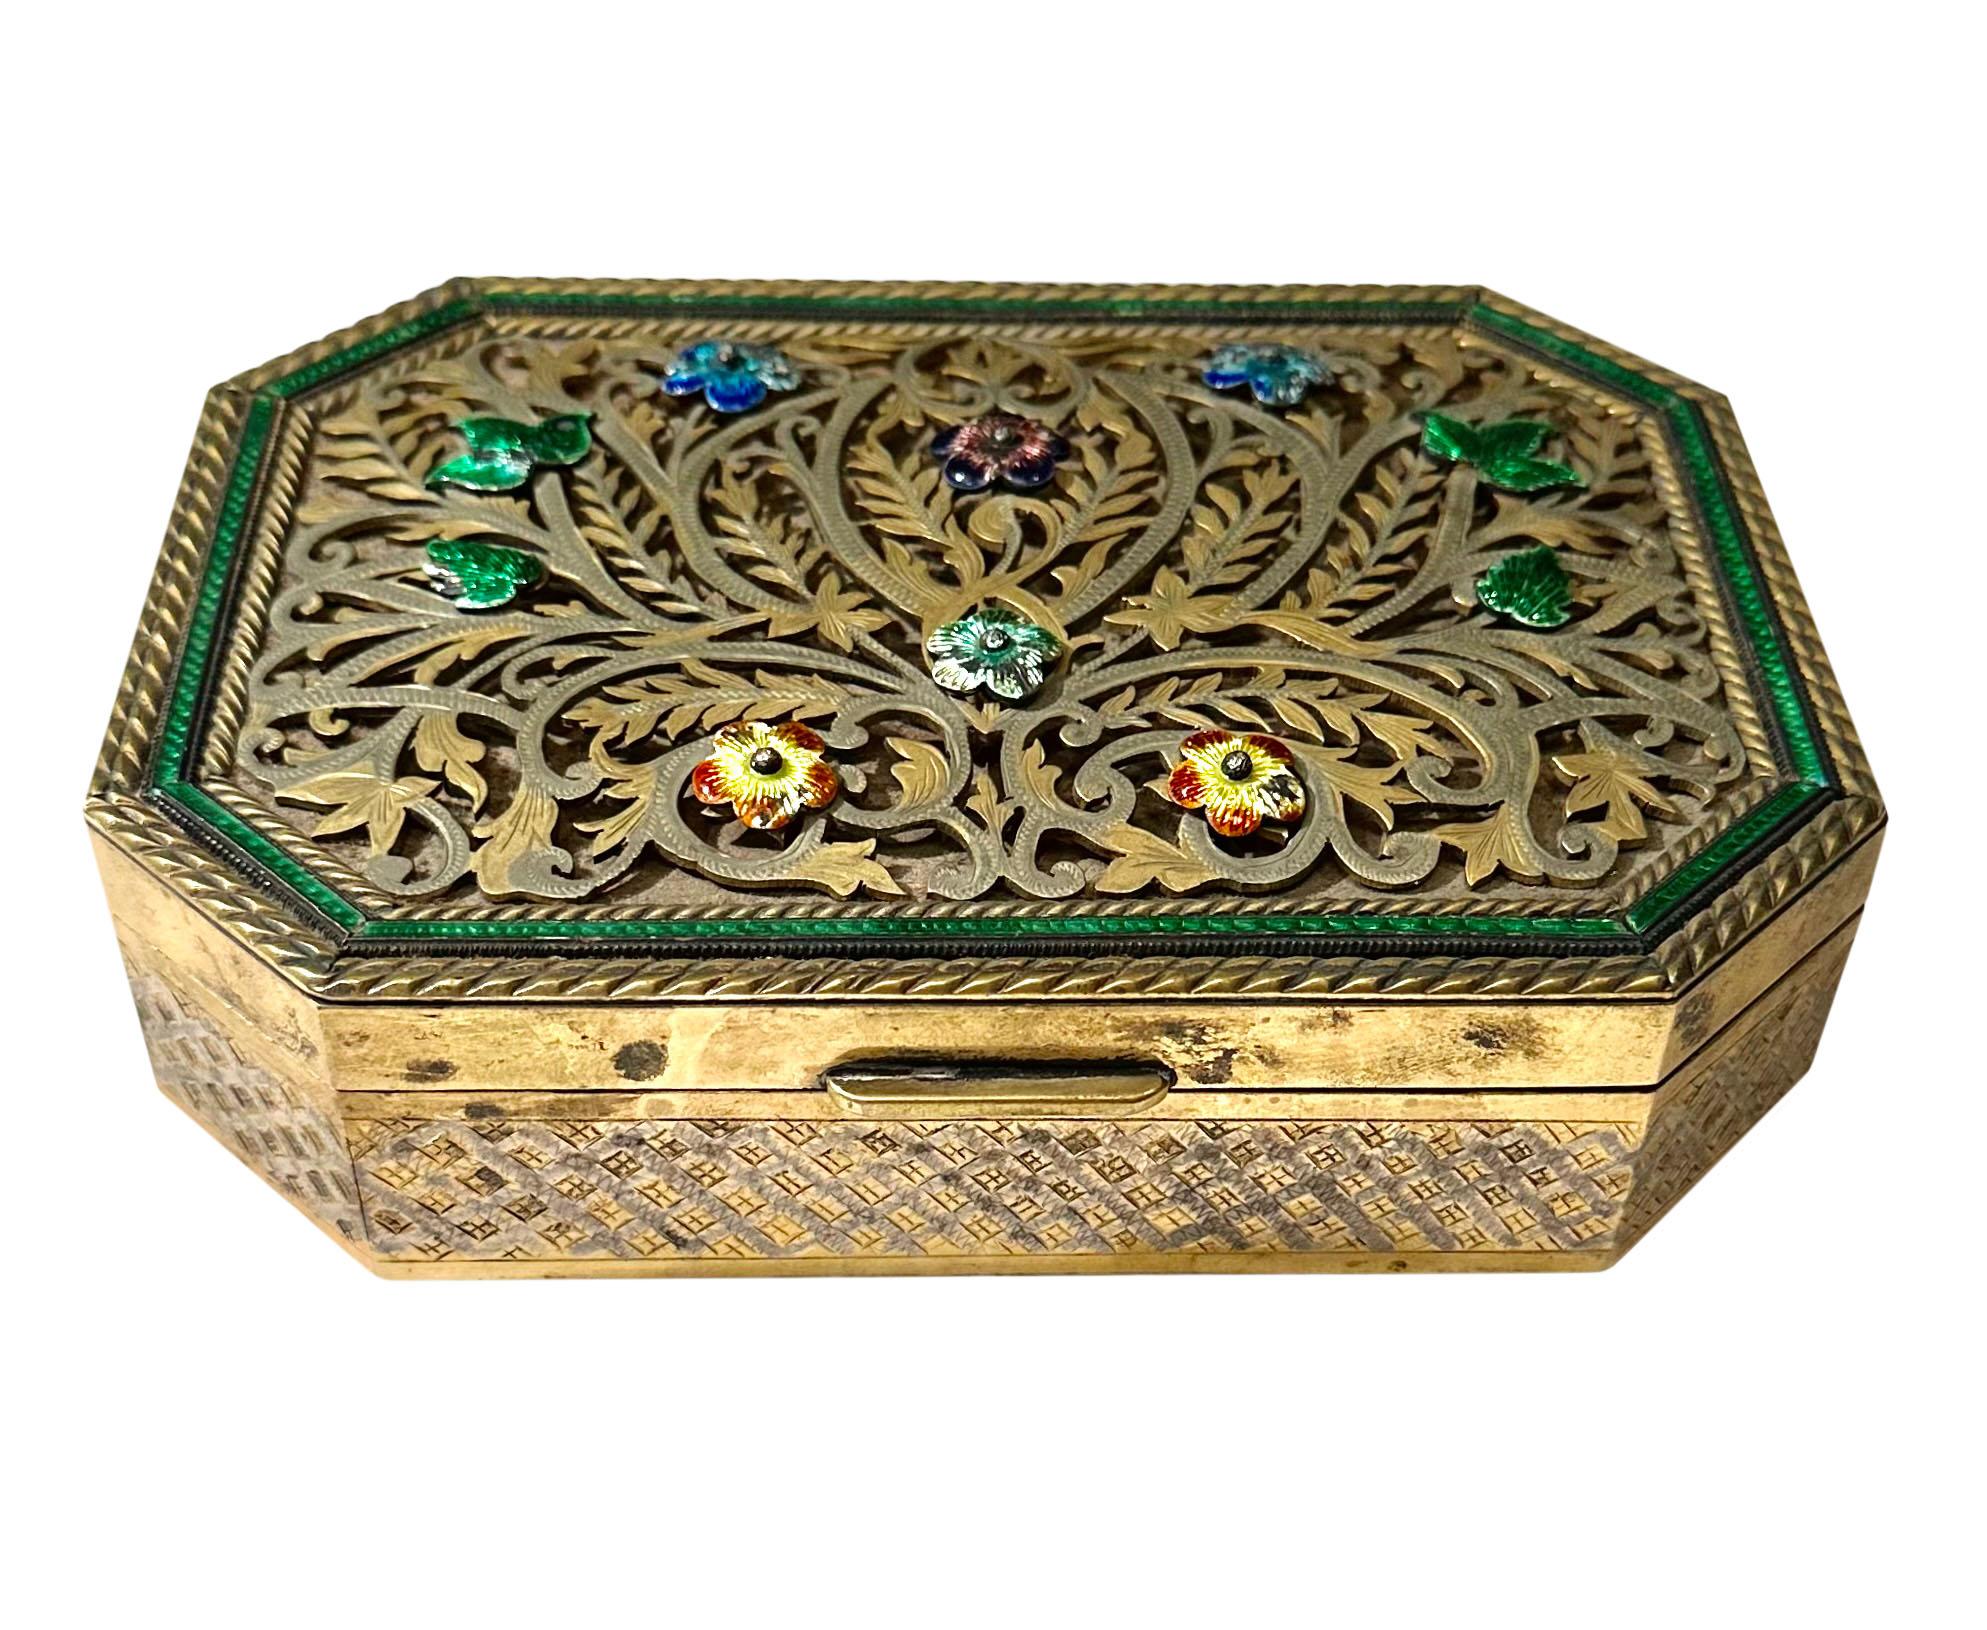 A turn of the century silver Vermeil reticulated Indian box with enamel border and flowers. It was monogrammed on the bottom at a later date as a gift.